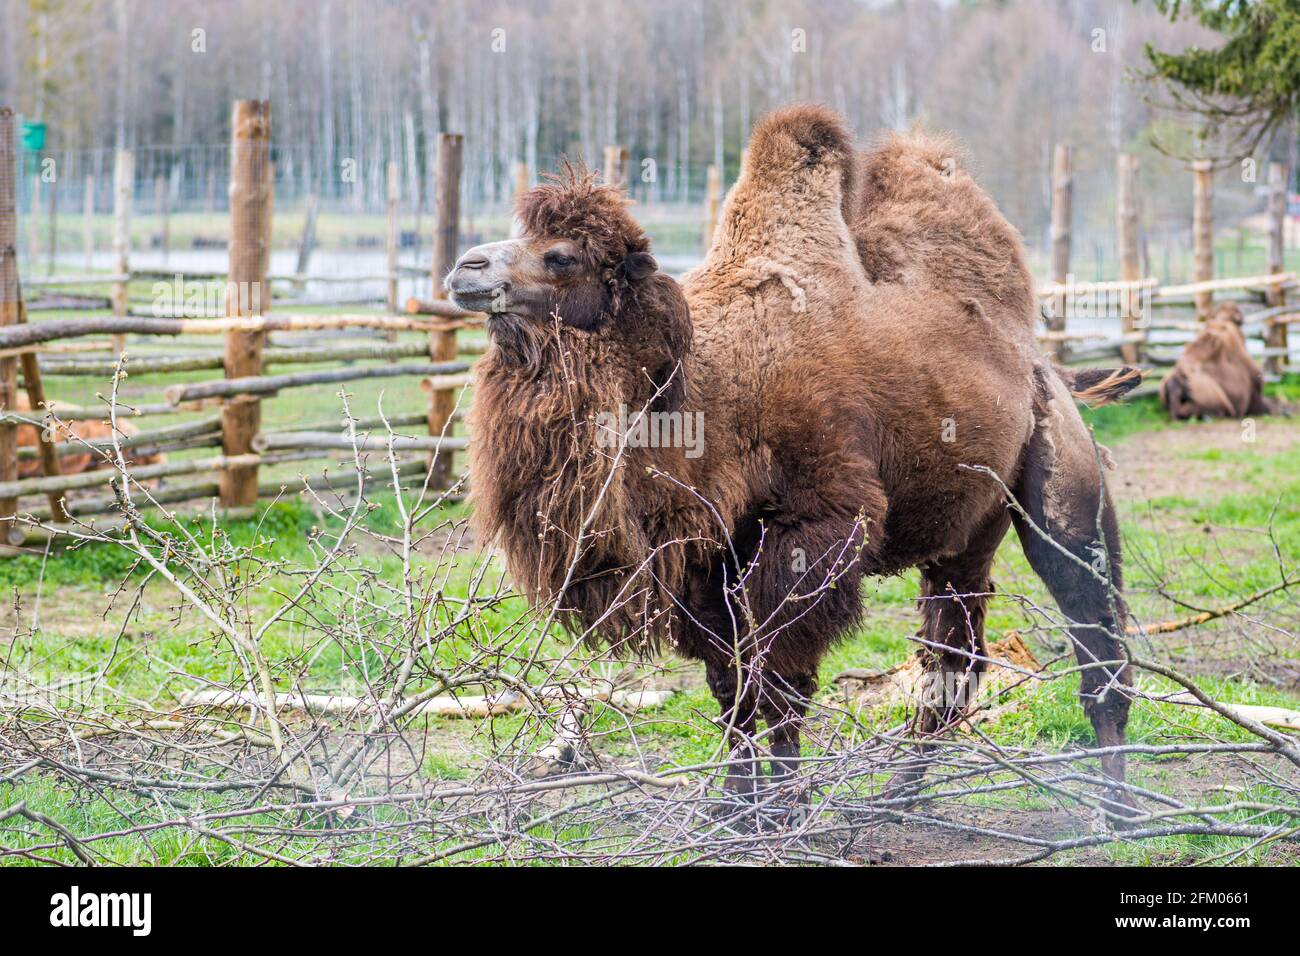 Beautiful two humps camel in a farm or zoo. Mongolian camel or domestic Bactrian camel, large even-toed ungulate native to the steppes of Central Asia Stock Photo